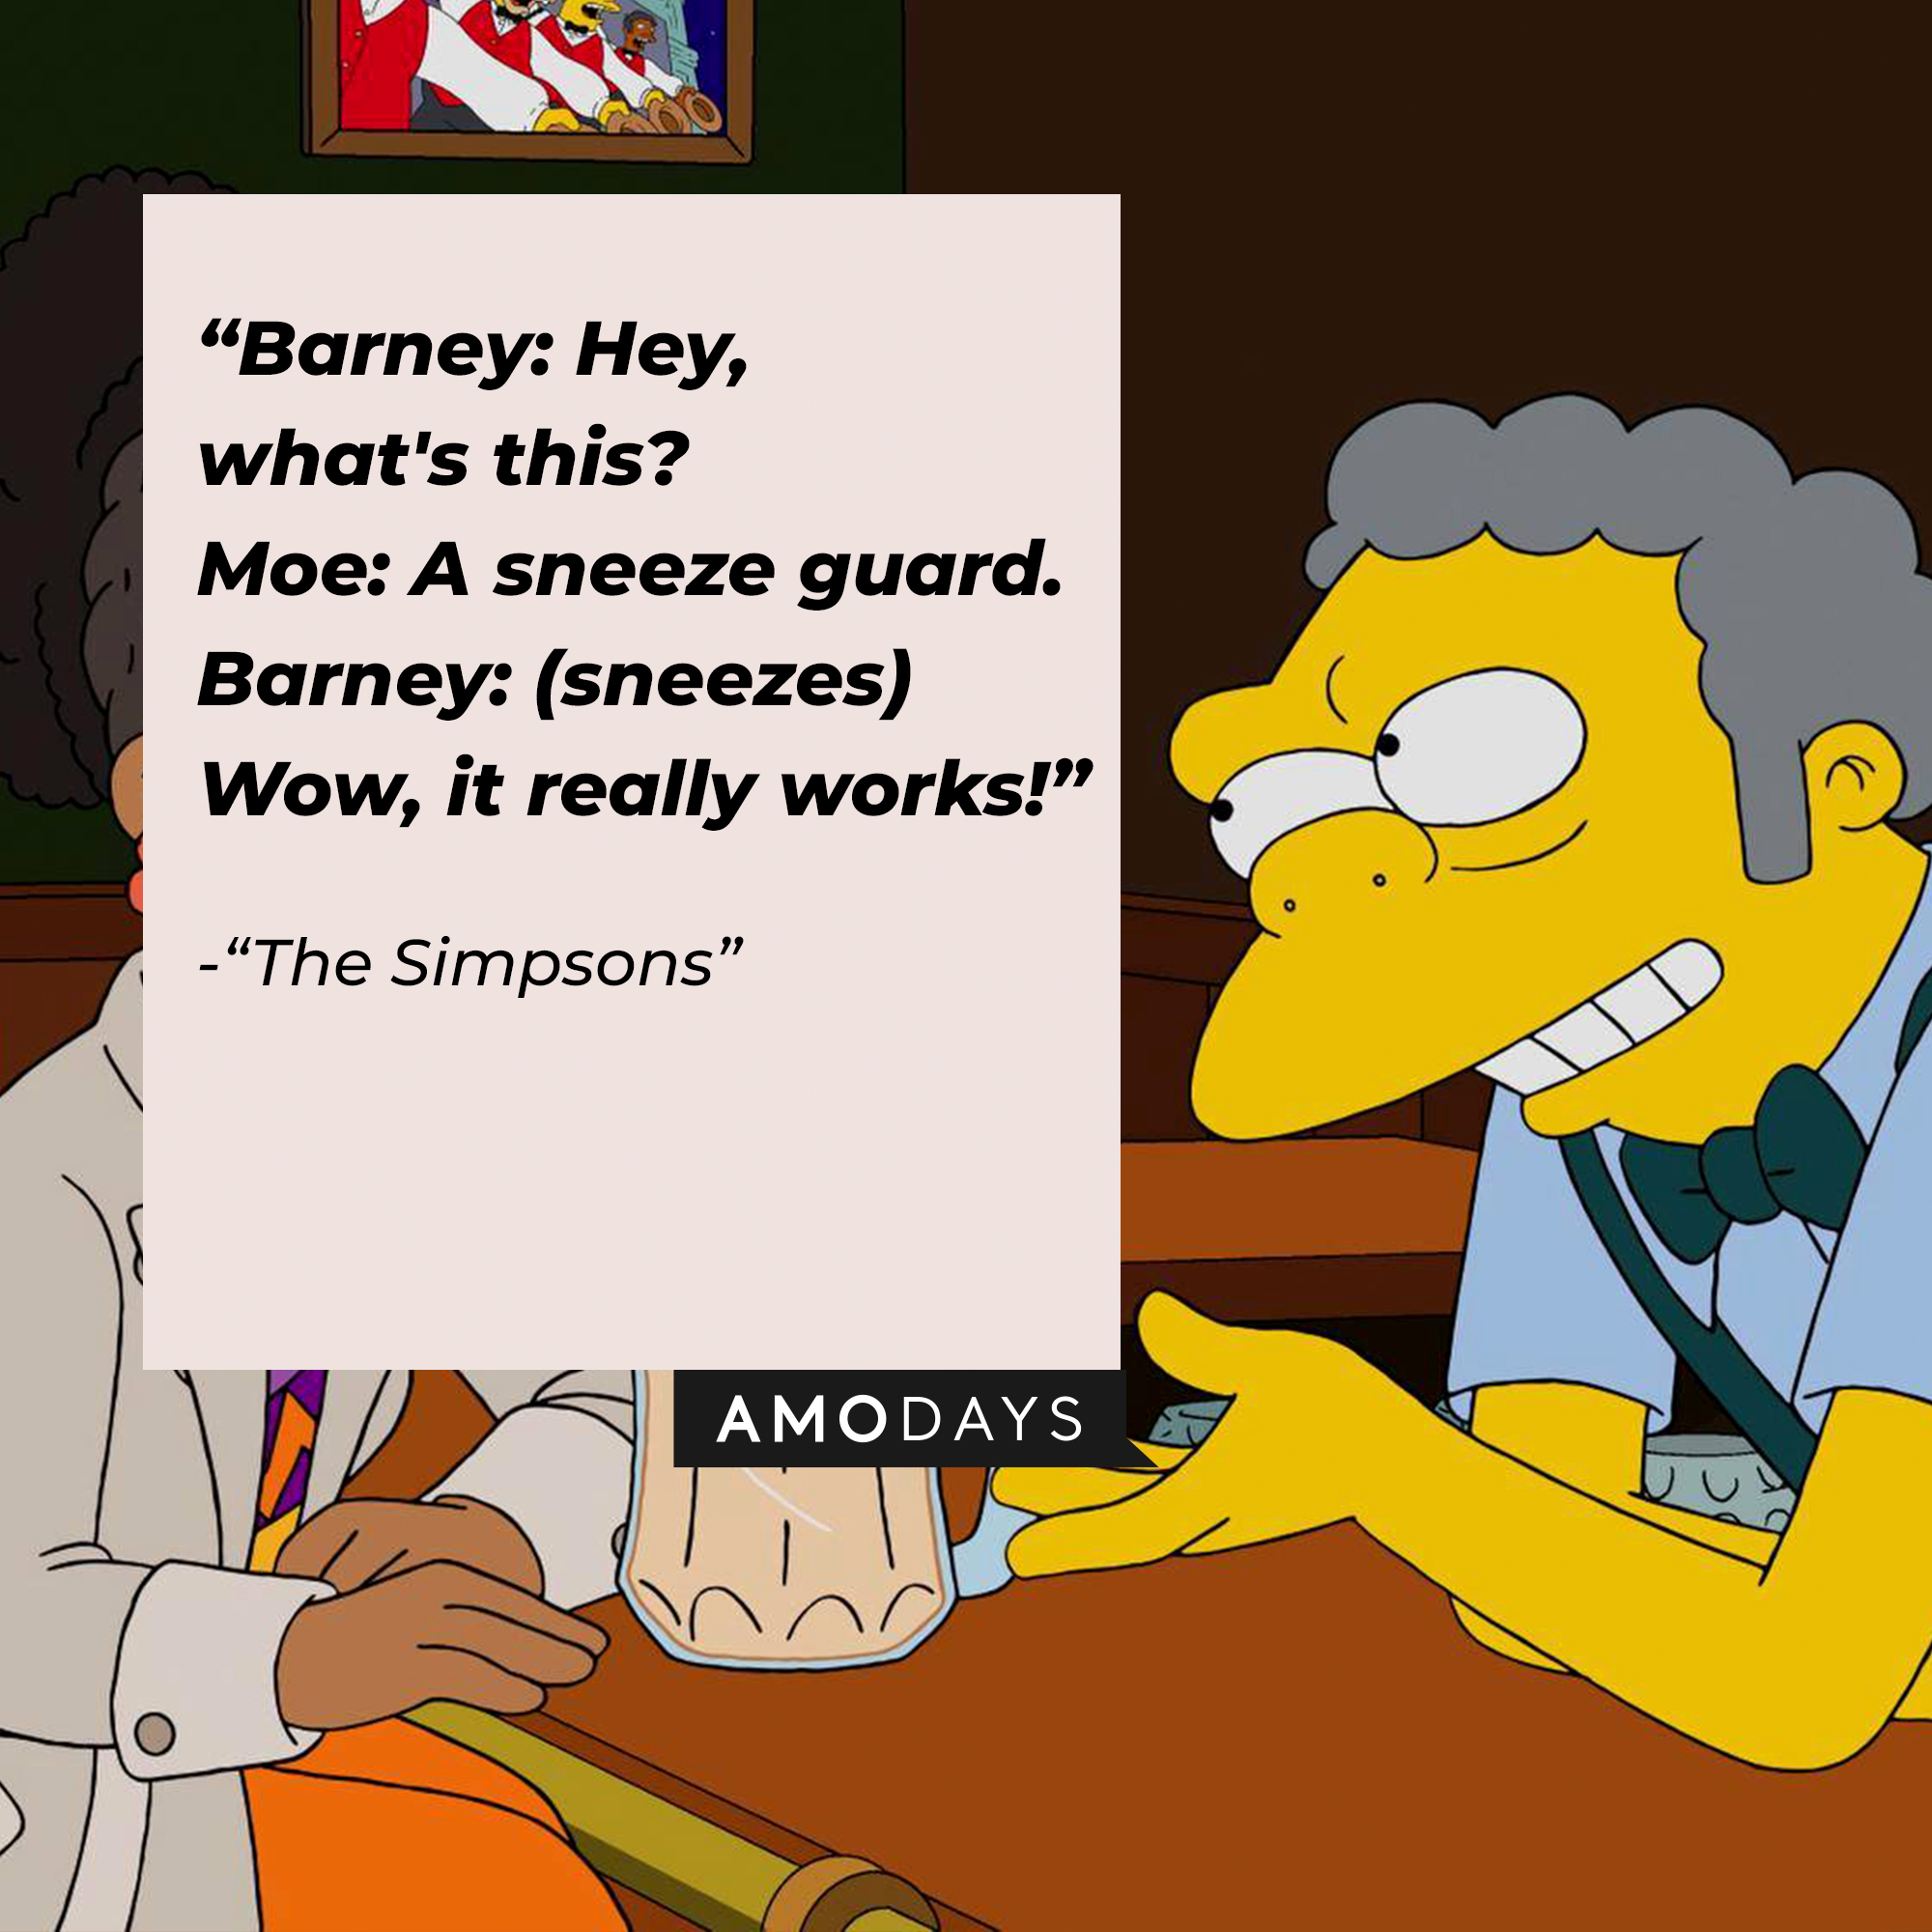 Image of Moe Szyslak with his quote from "The Simpsons:" "Barney: Hey, what's this? ; Moe: A sneeze guard. ; Barney: (sneezes) Wow, it really works!" | Source: Facebook.com/TheSimpsons